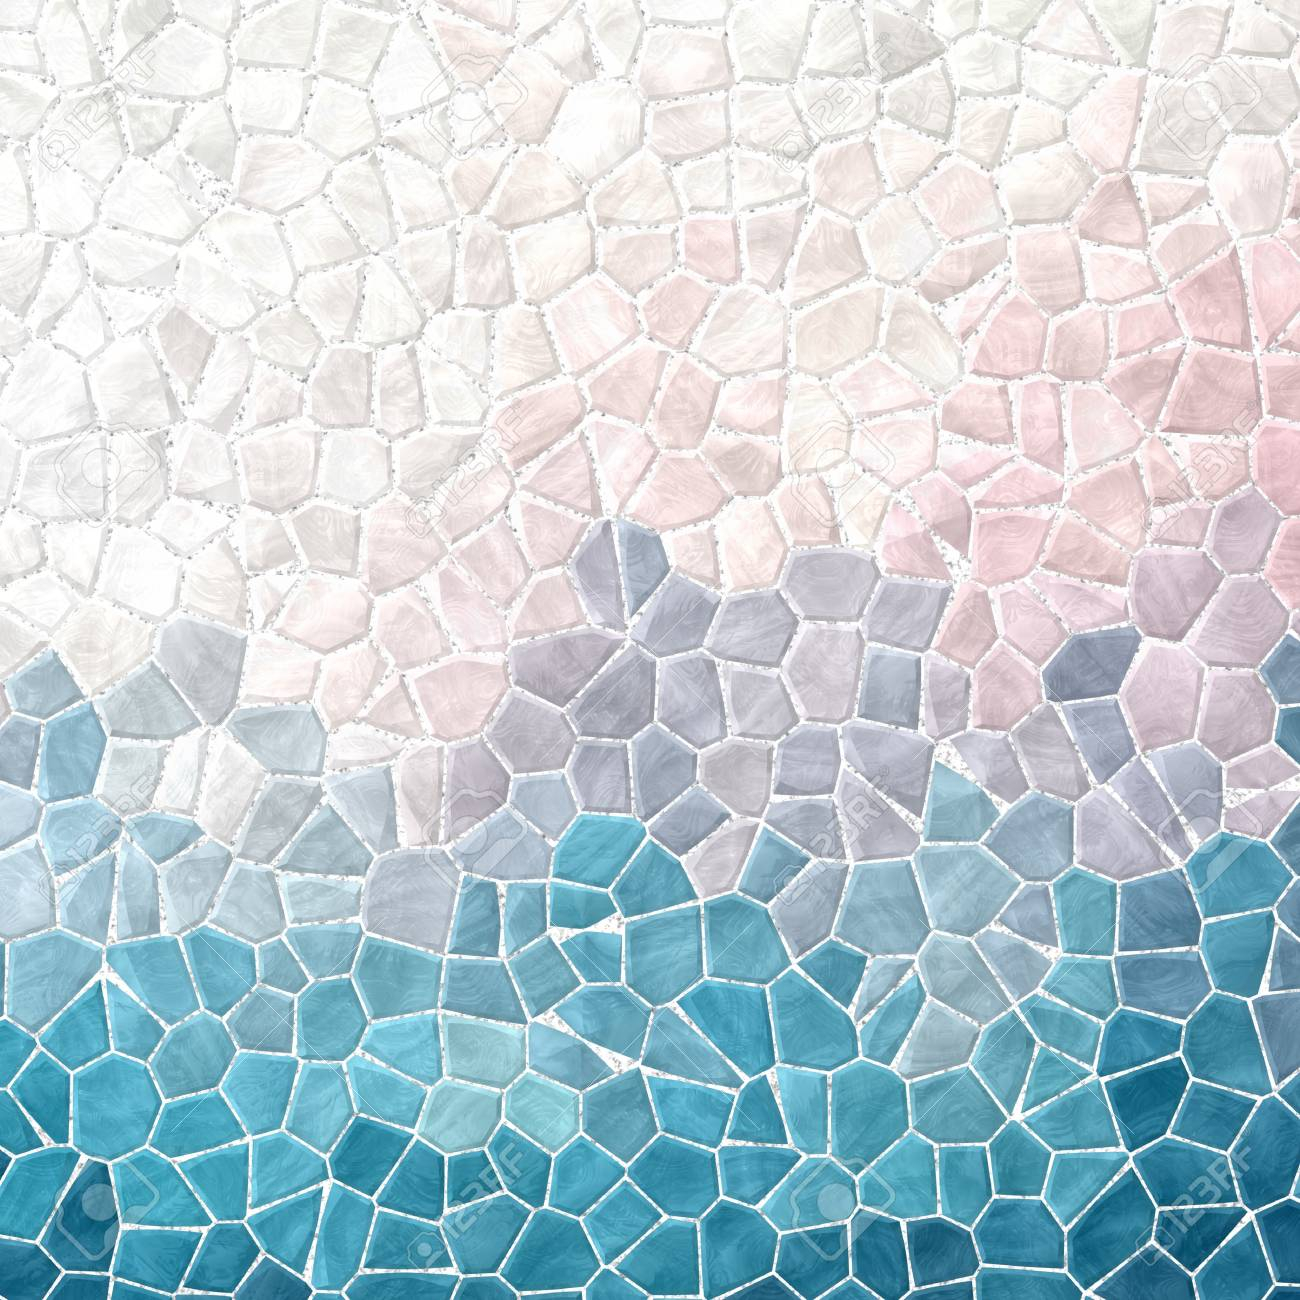 Abstract Nature Marble Plastic Stony Mosaic Tiles Texture Background intended for measurements 1300 X 1300